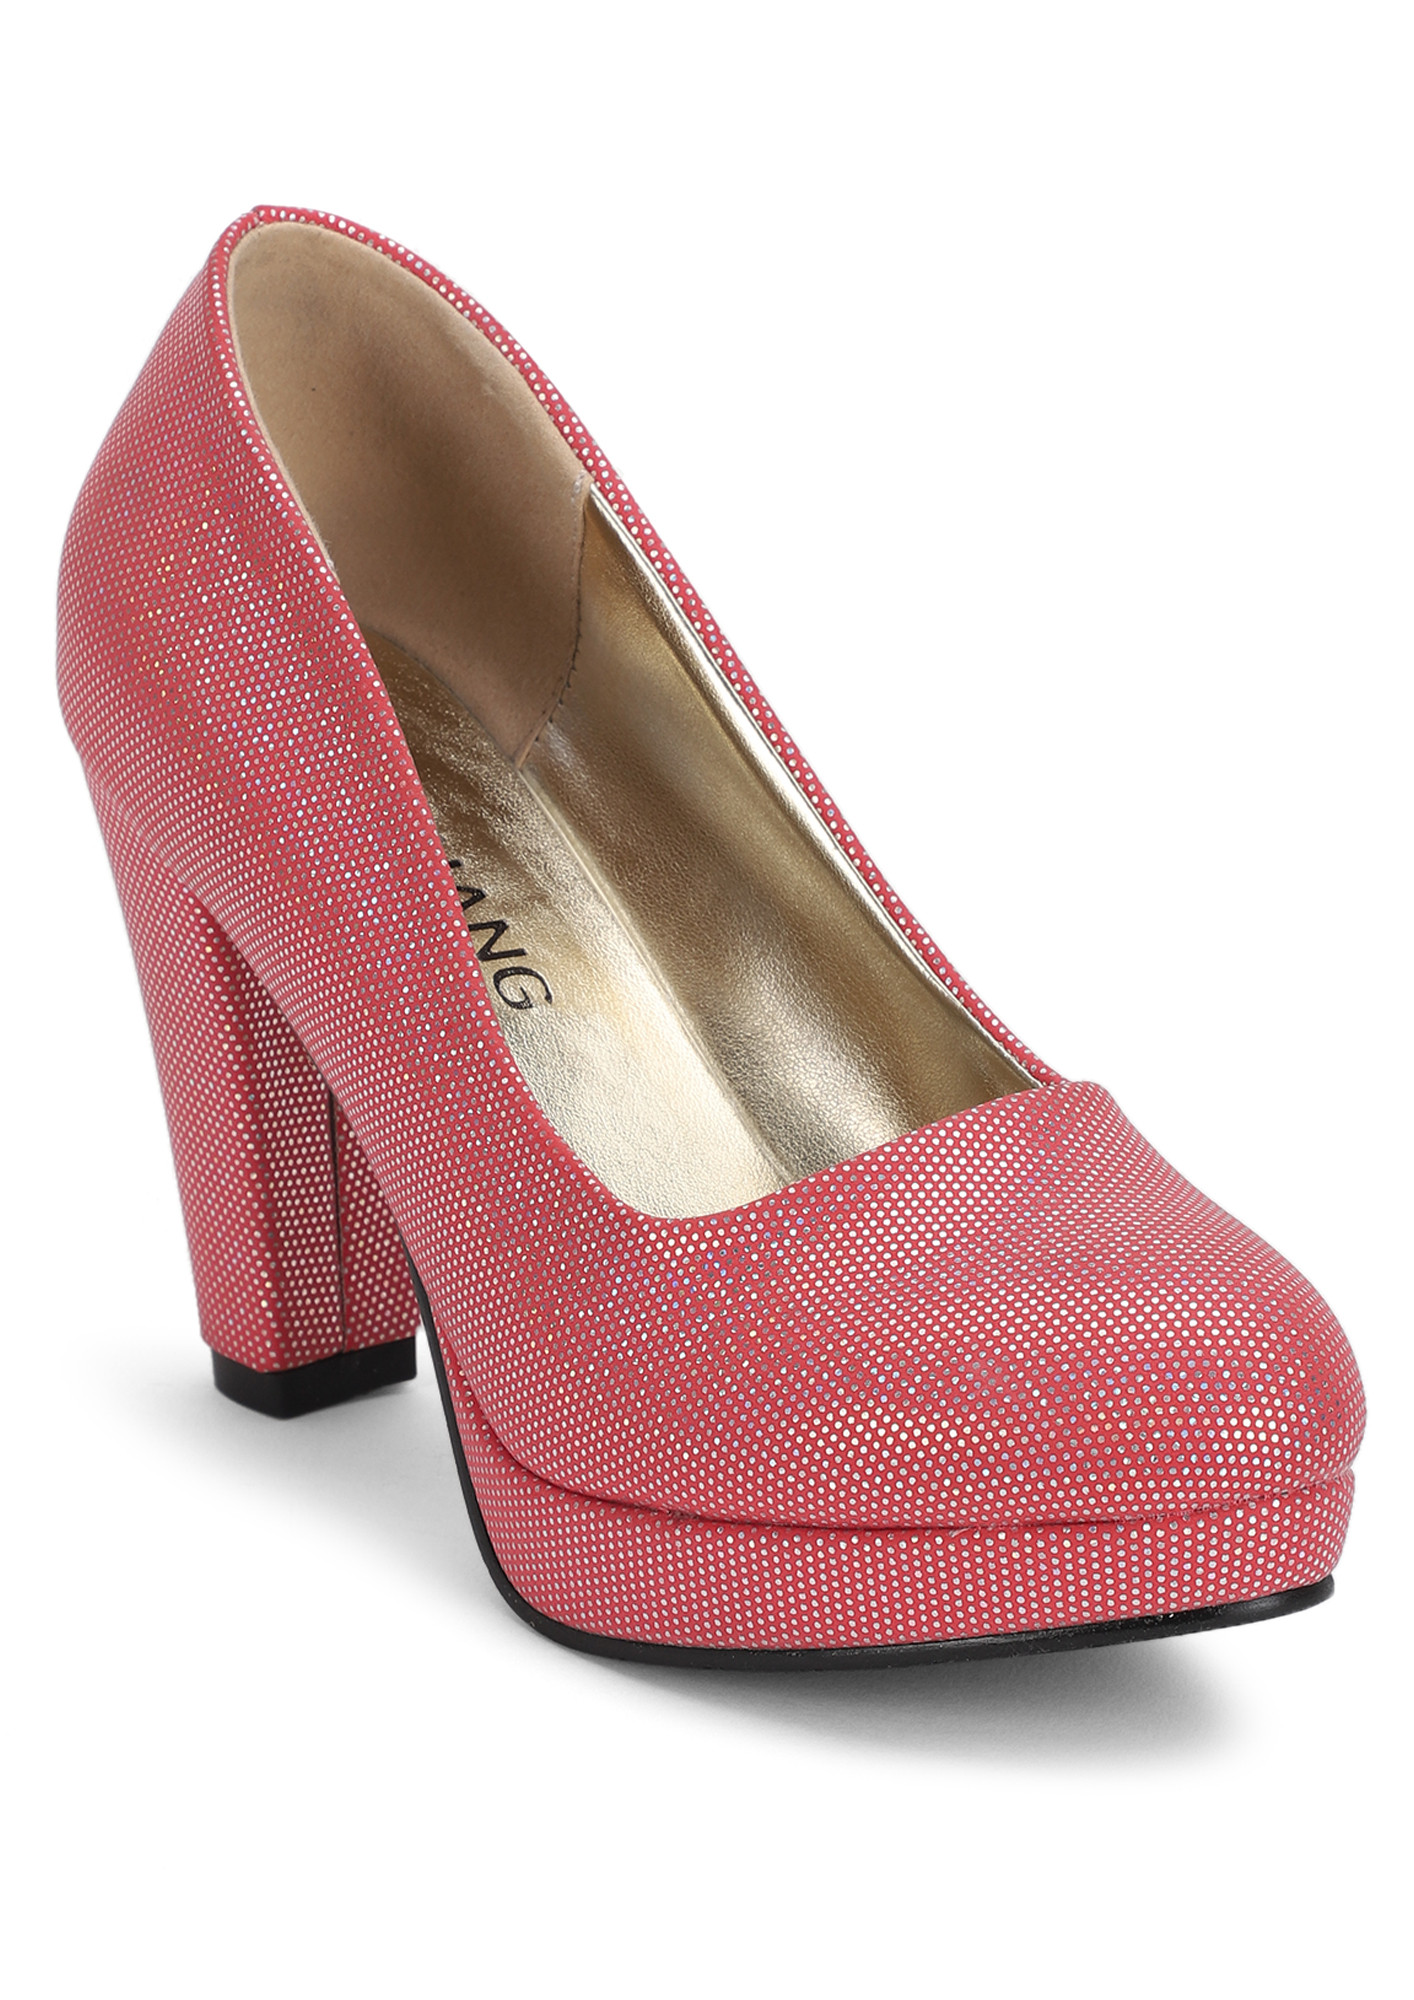 SHINE AND KISSES RED PUMPS